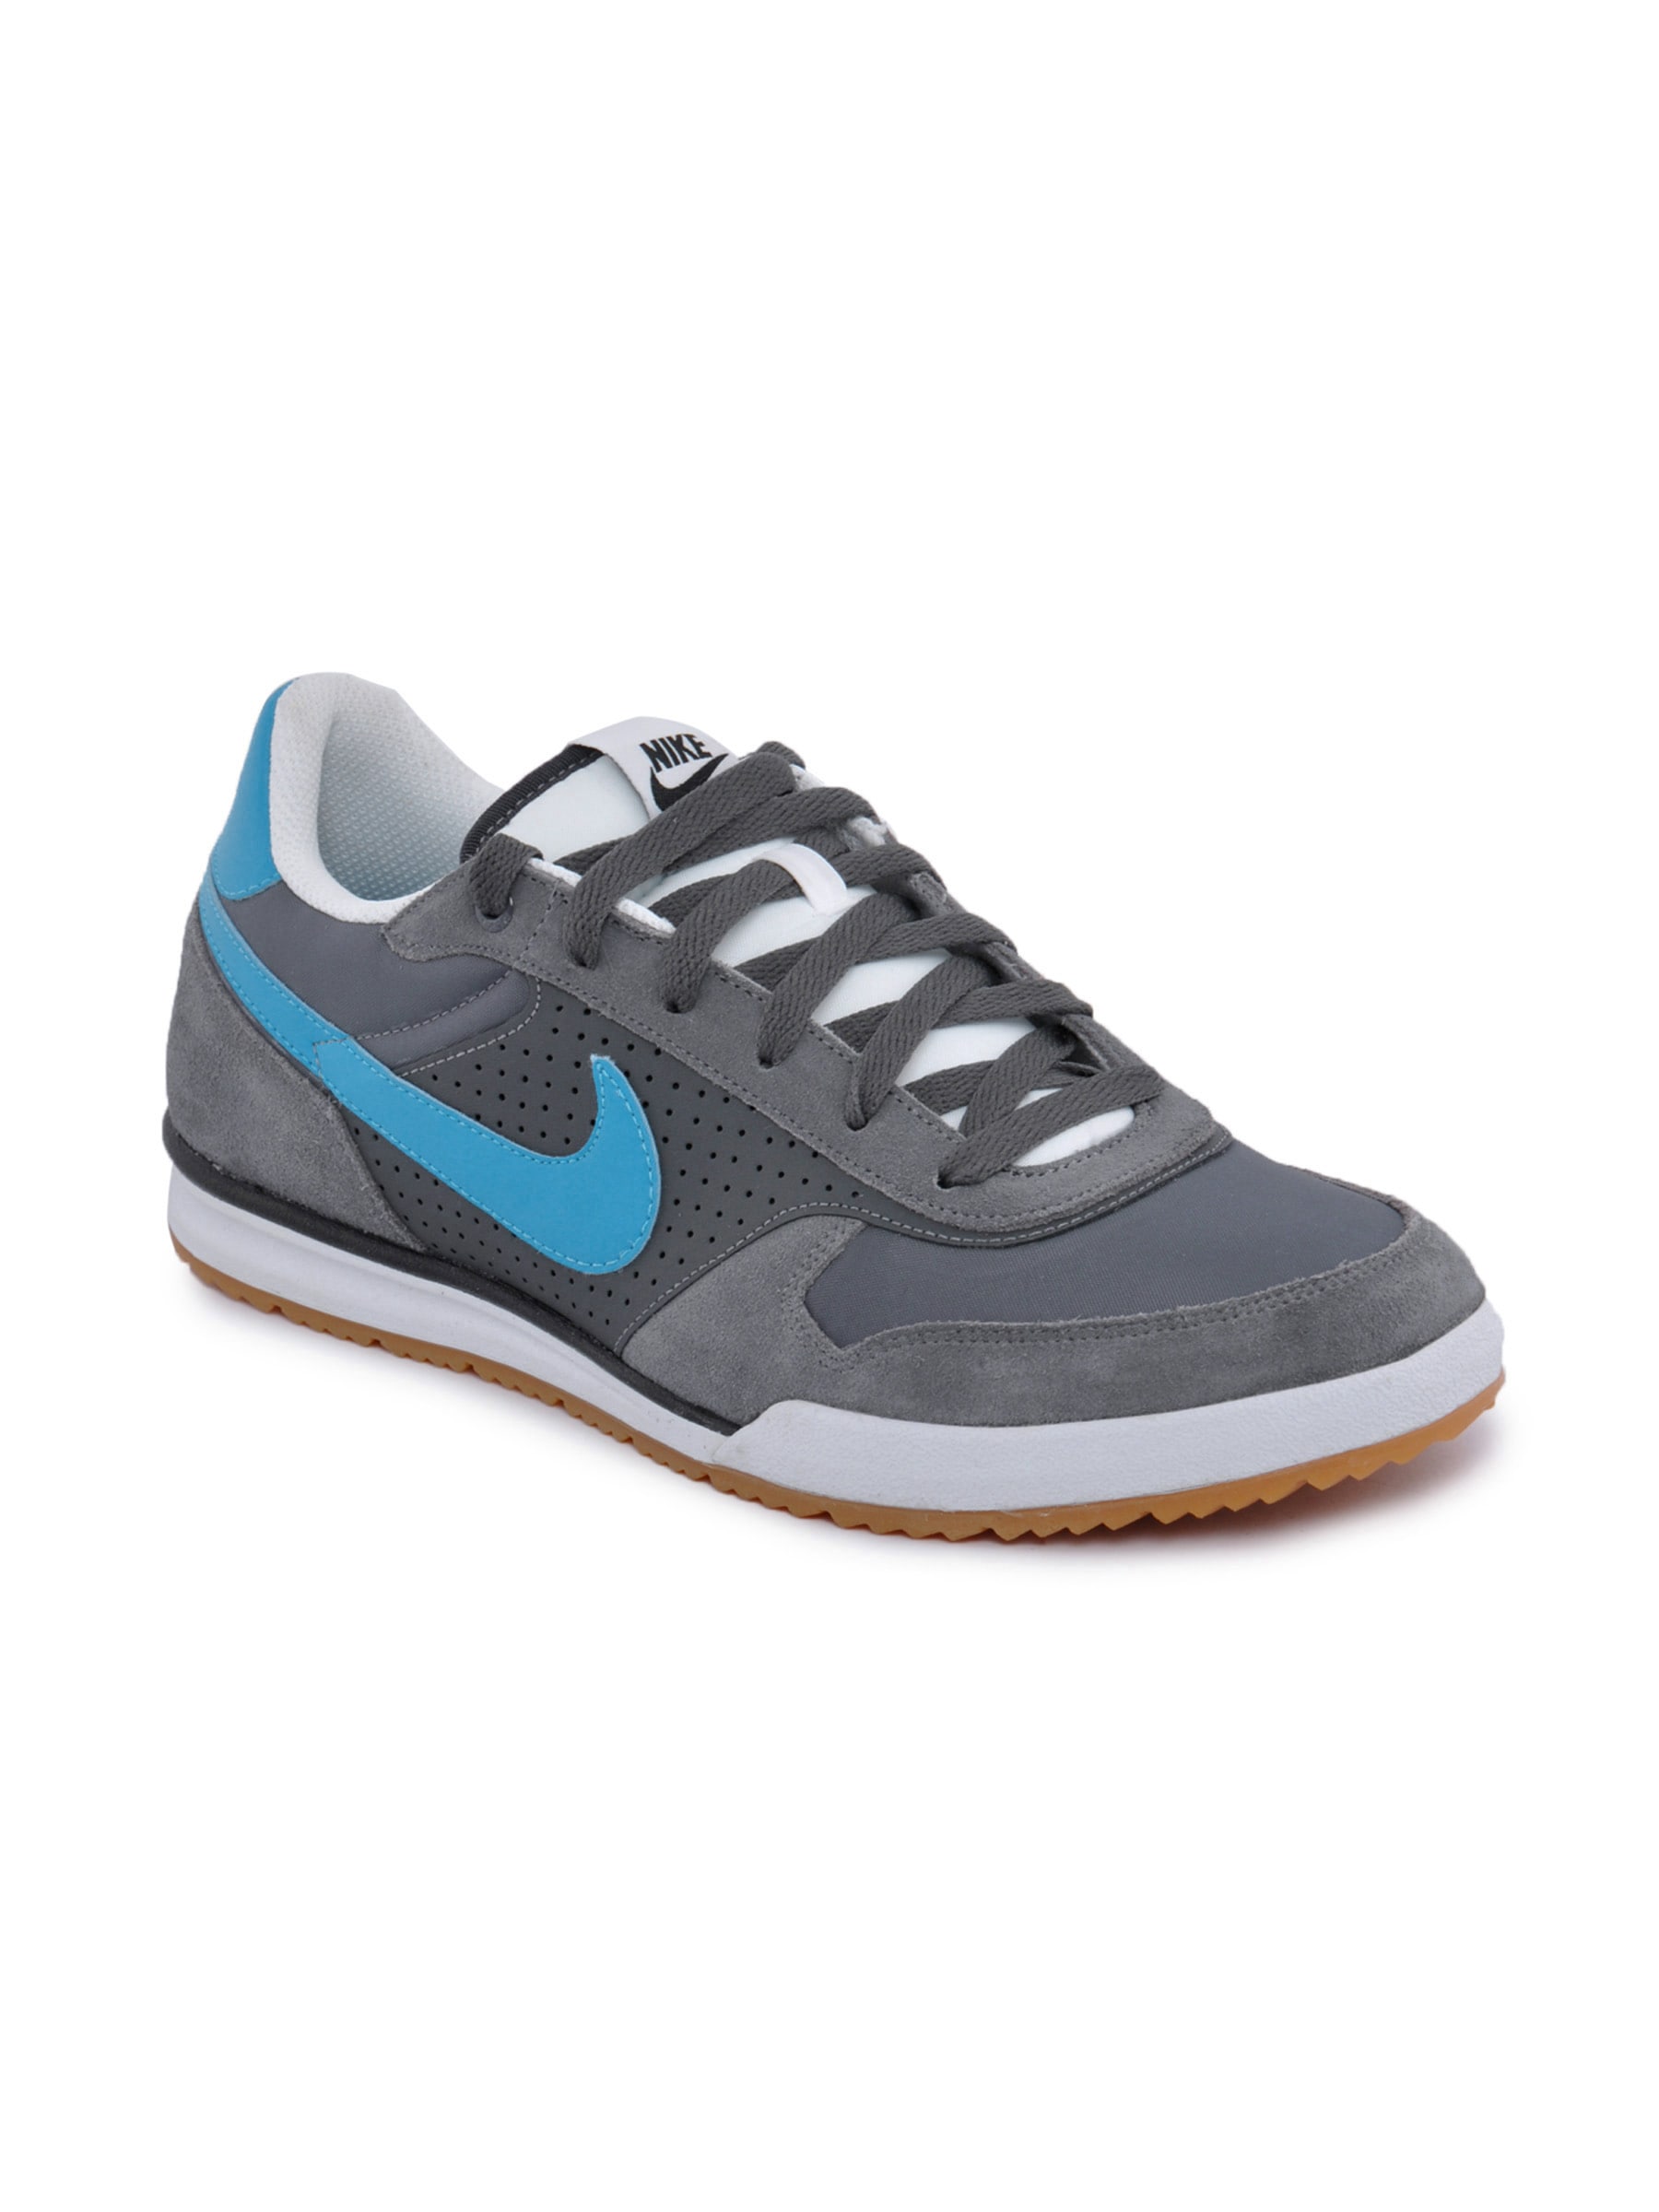 Nike Men Field Trainer Textile Grey Sports Shoes